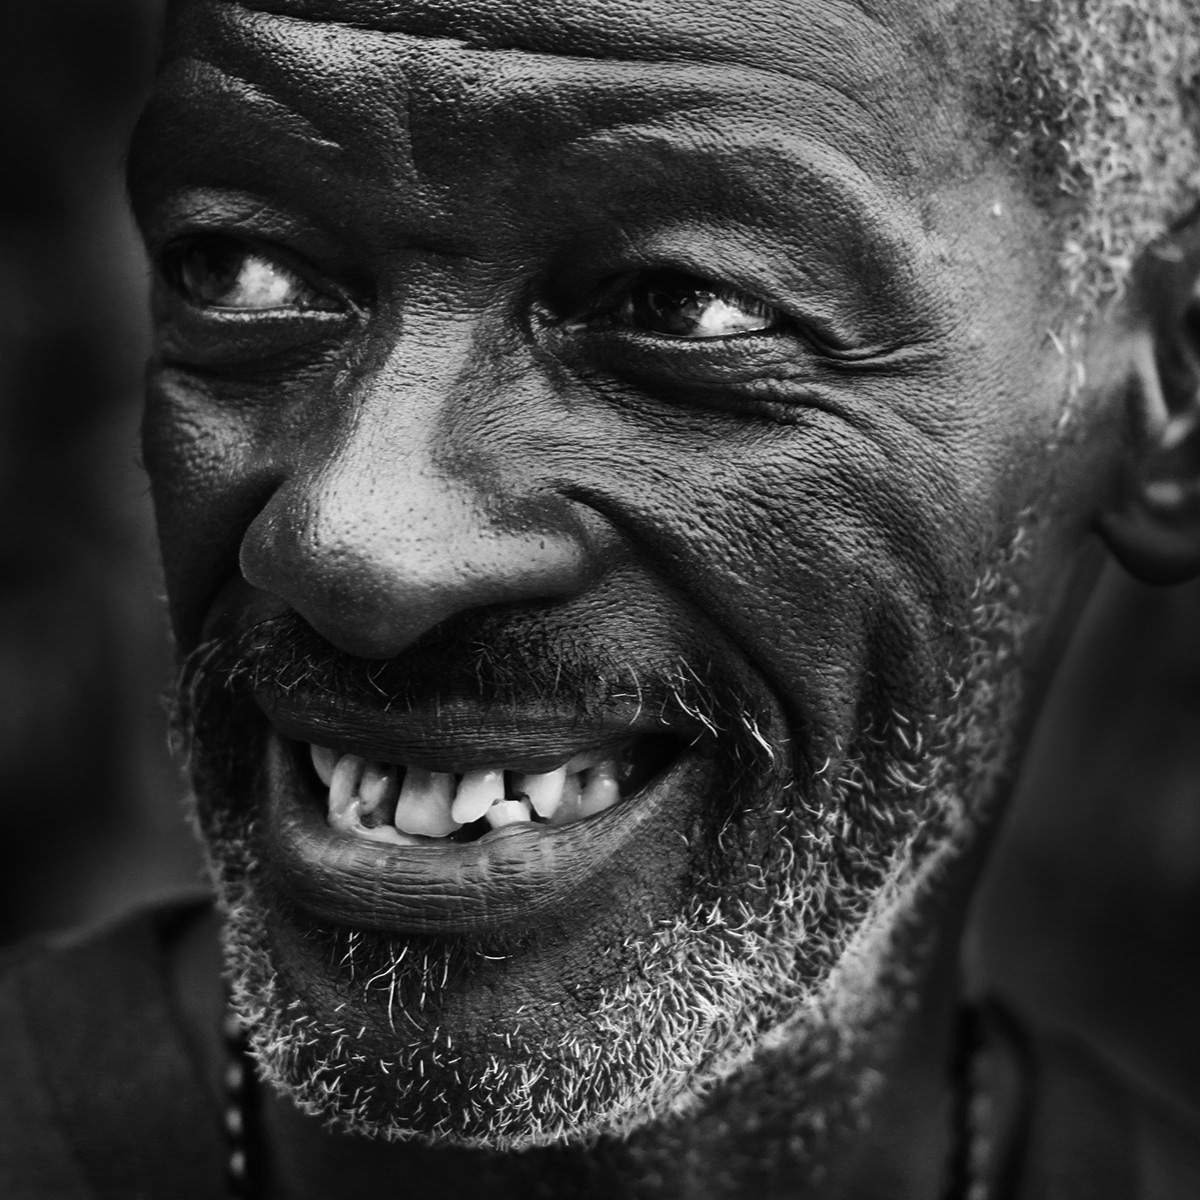 faces  face portrait portraits black and white bw monochrome eyes homeless old eldrly